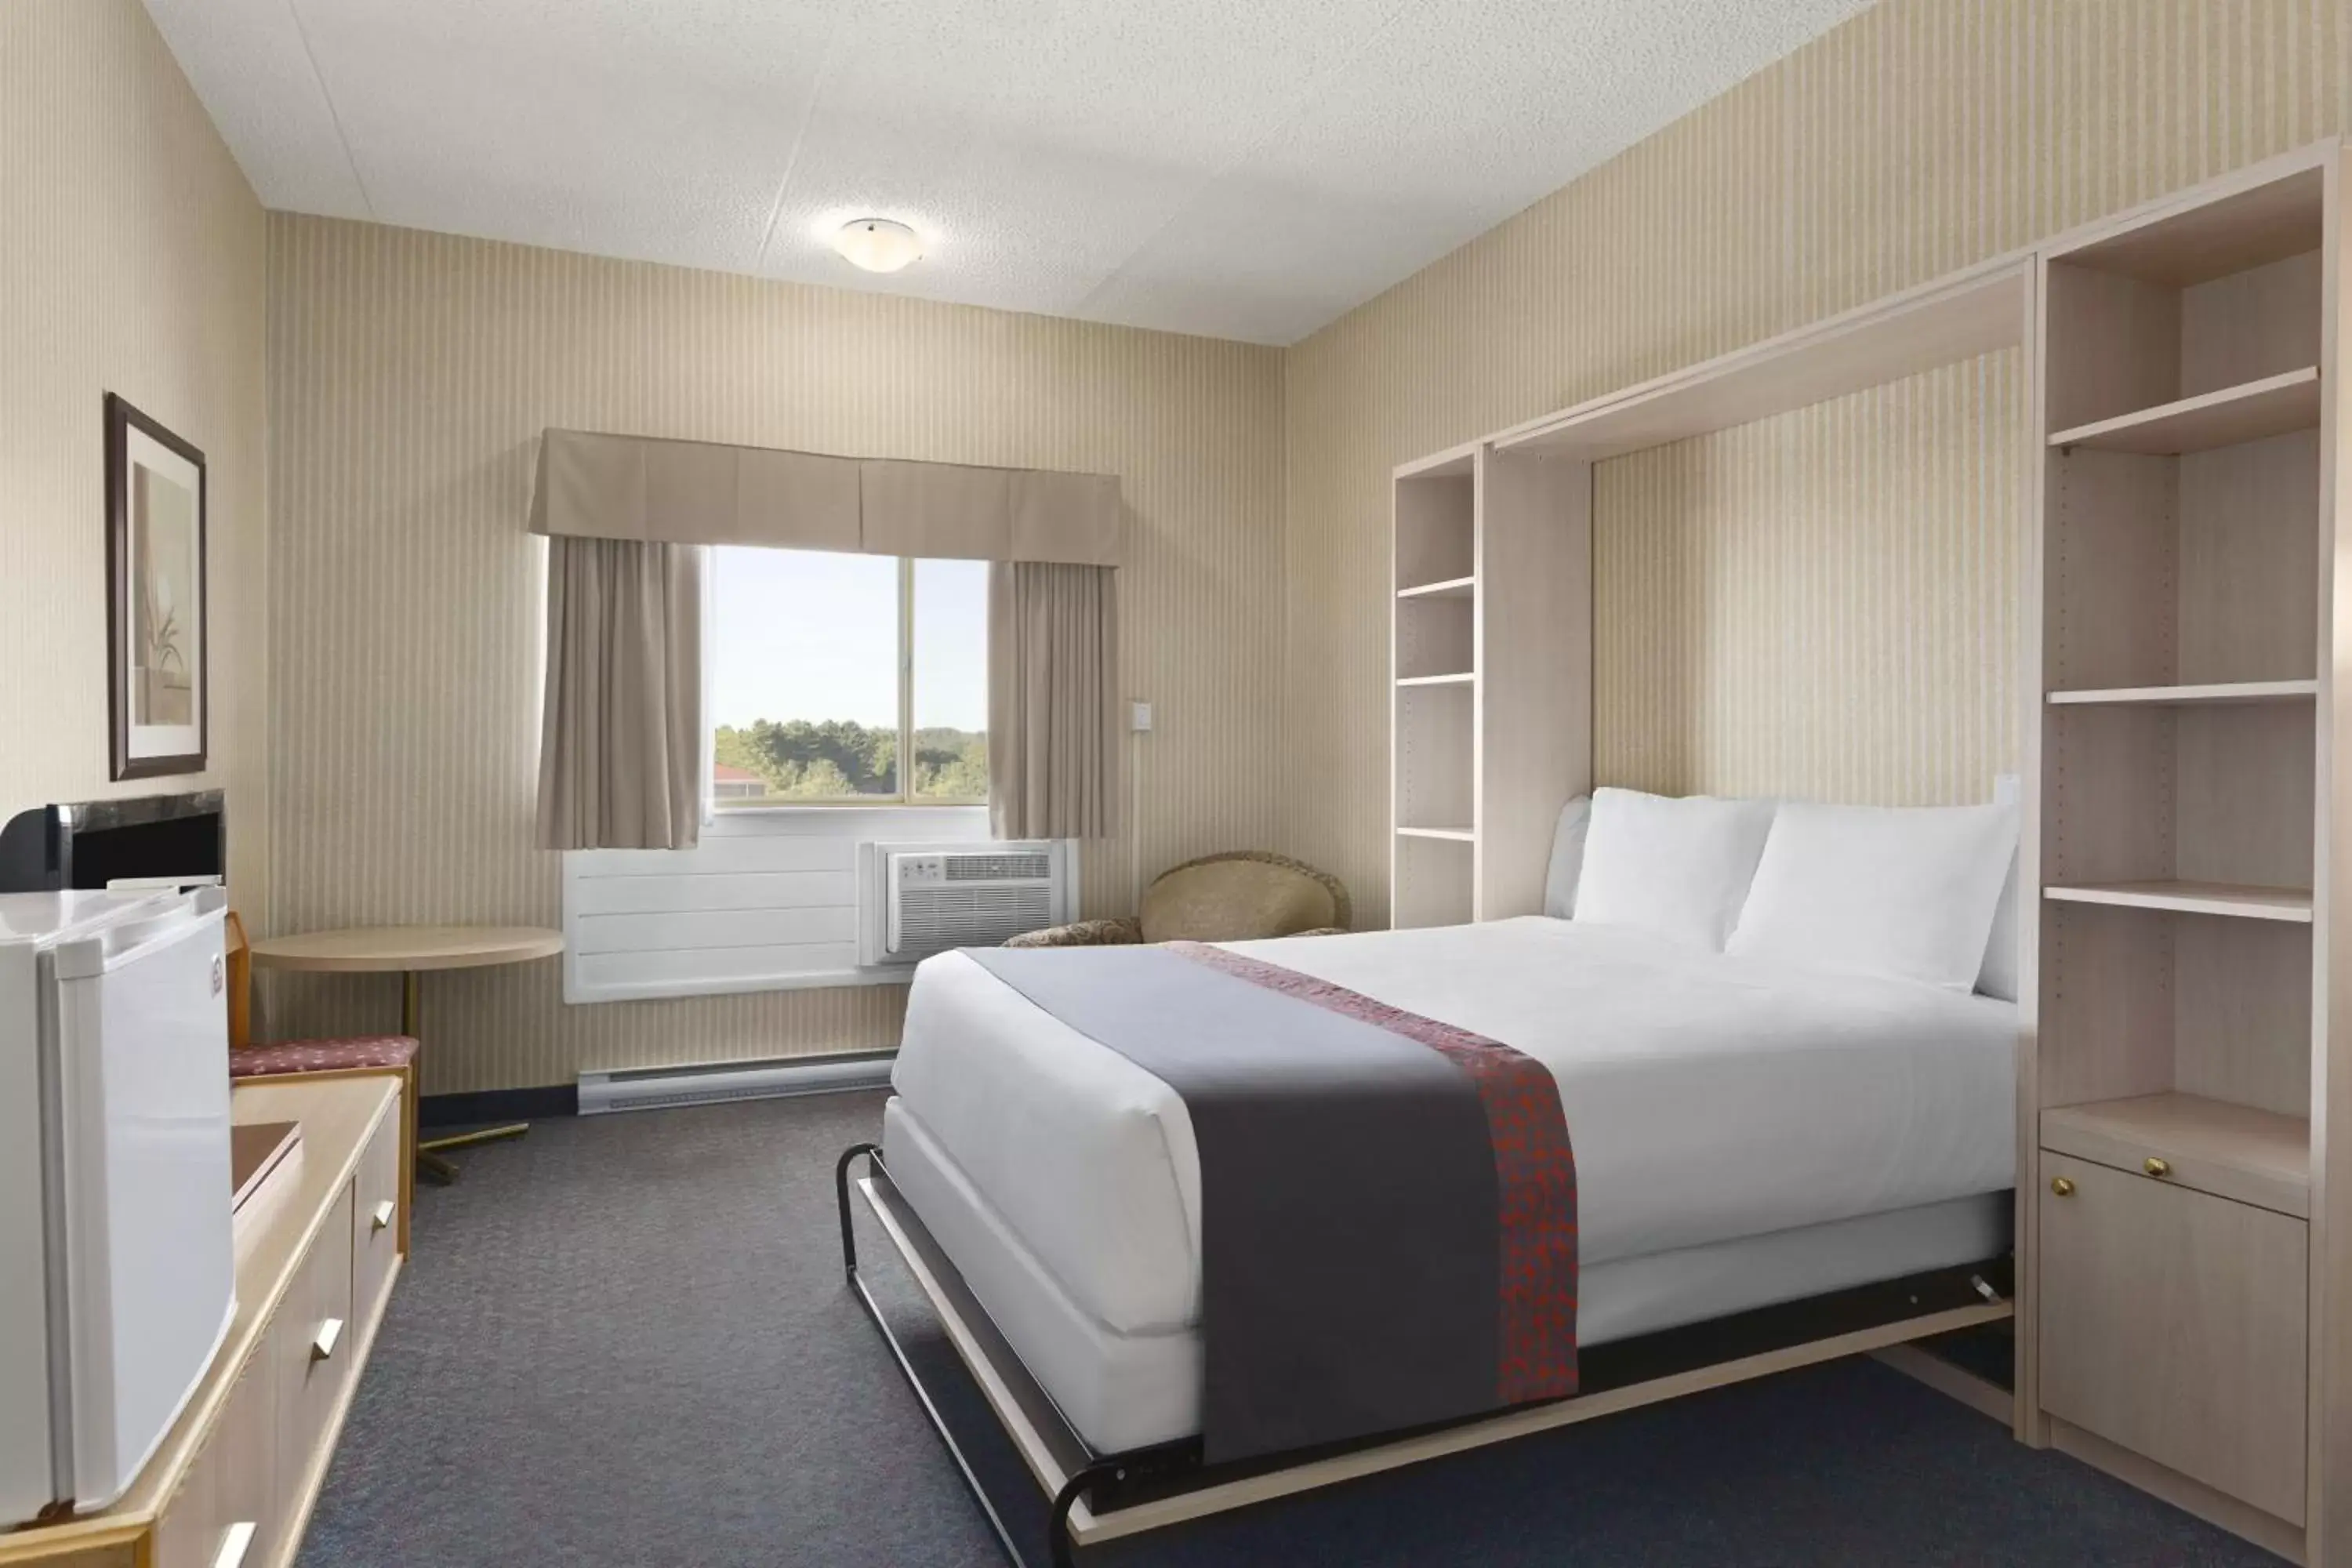 Bed, Room Photo in Days Inn by Wyndham Bridgewater Conference Center